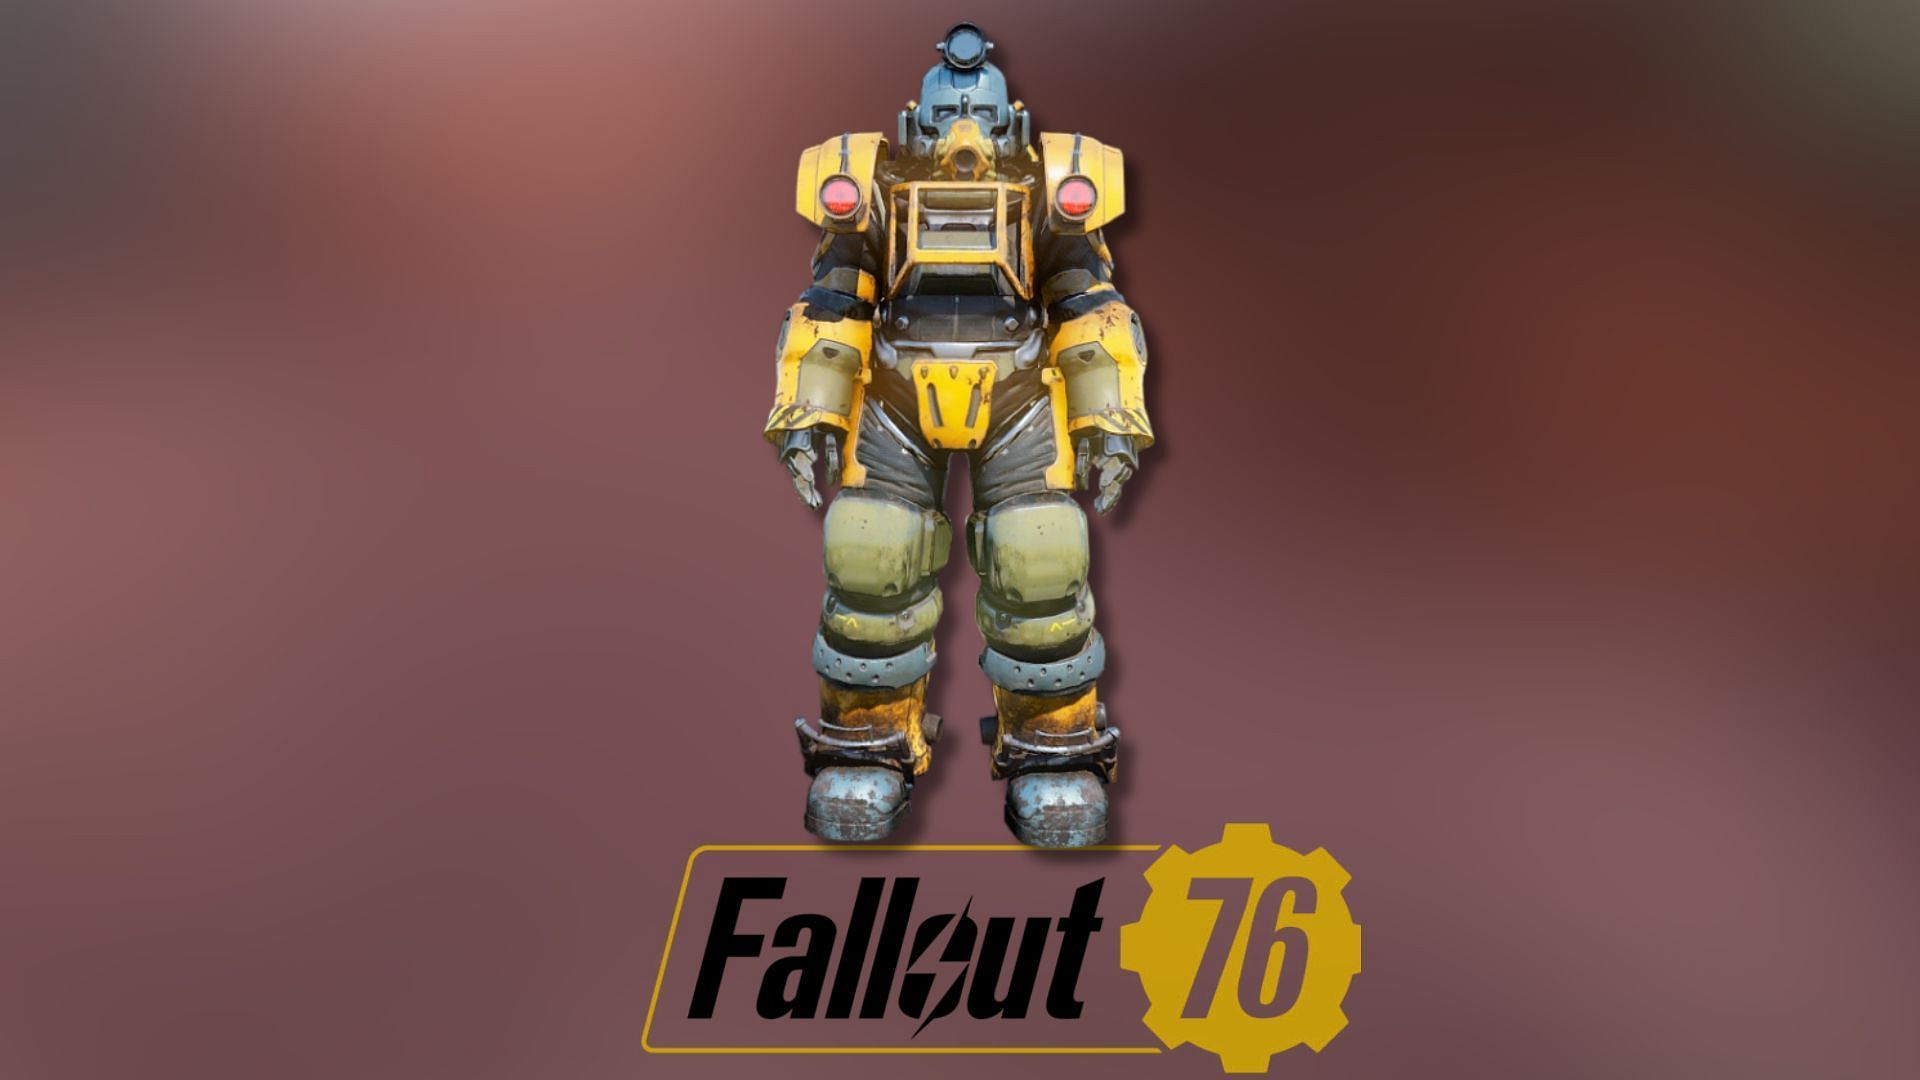 Excavator is the best Power Armor for mining minerals in Fallout 76 (Image via Bethesda Game Studios)